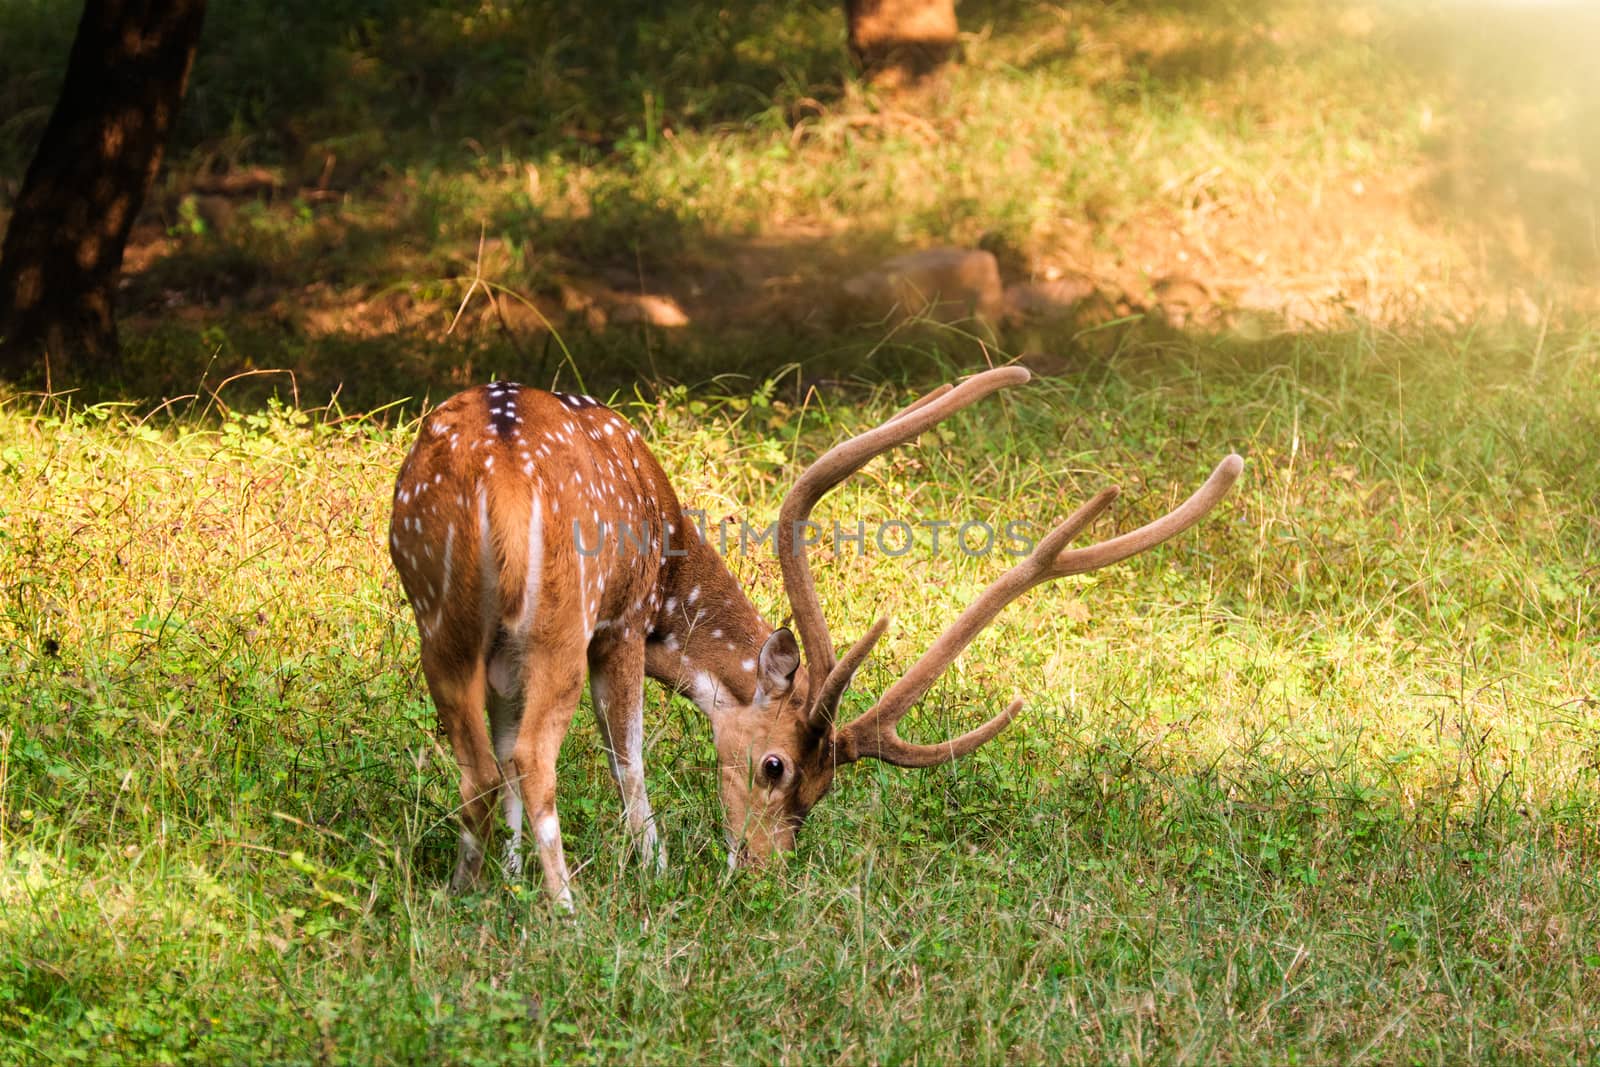 Beautiful male chital or spotted deer in Ranthambore National Park, Rajasthan, India by dimol